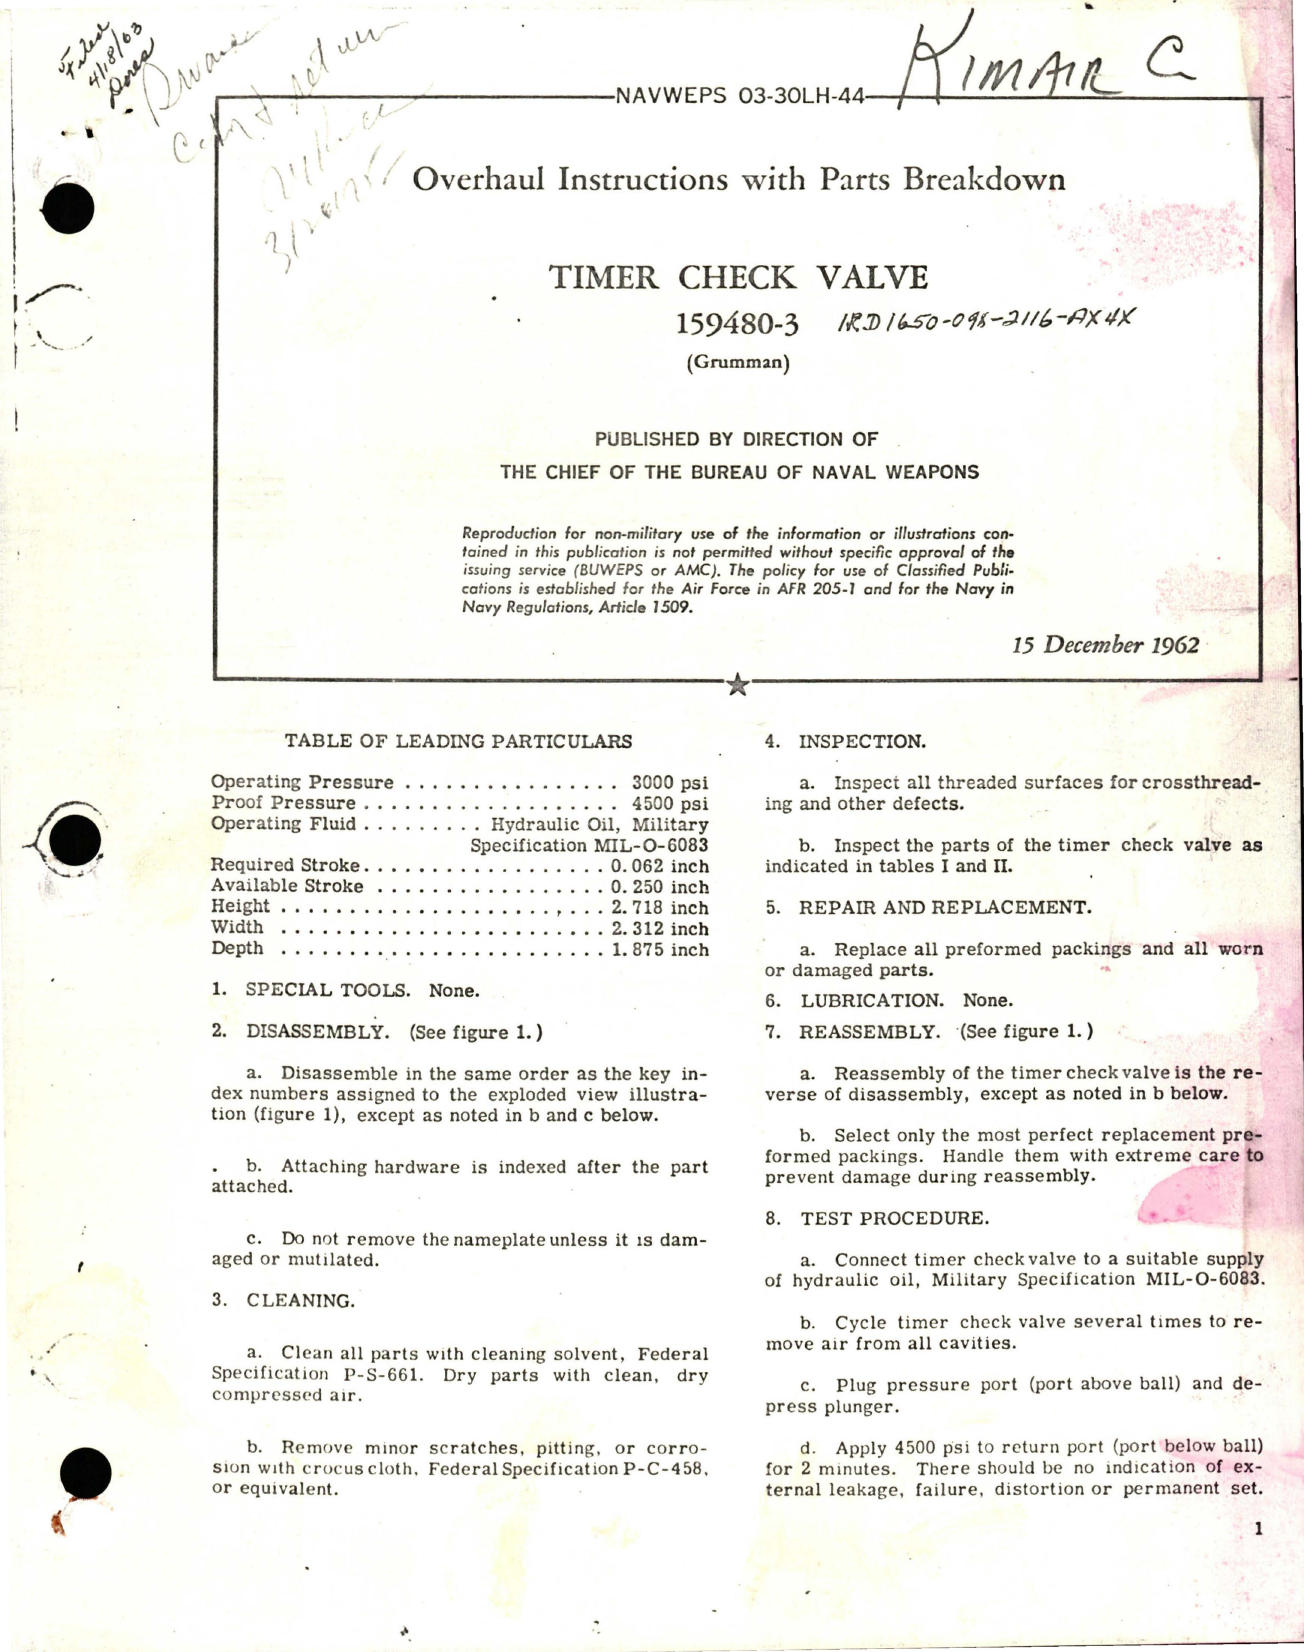 Sample page 1 from AirCorps Library document: Overhaul Instructions with Parts Breakdown for Timer Check Valve - 159480-3